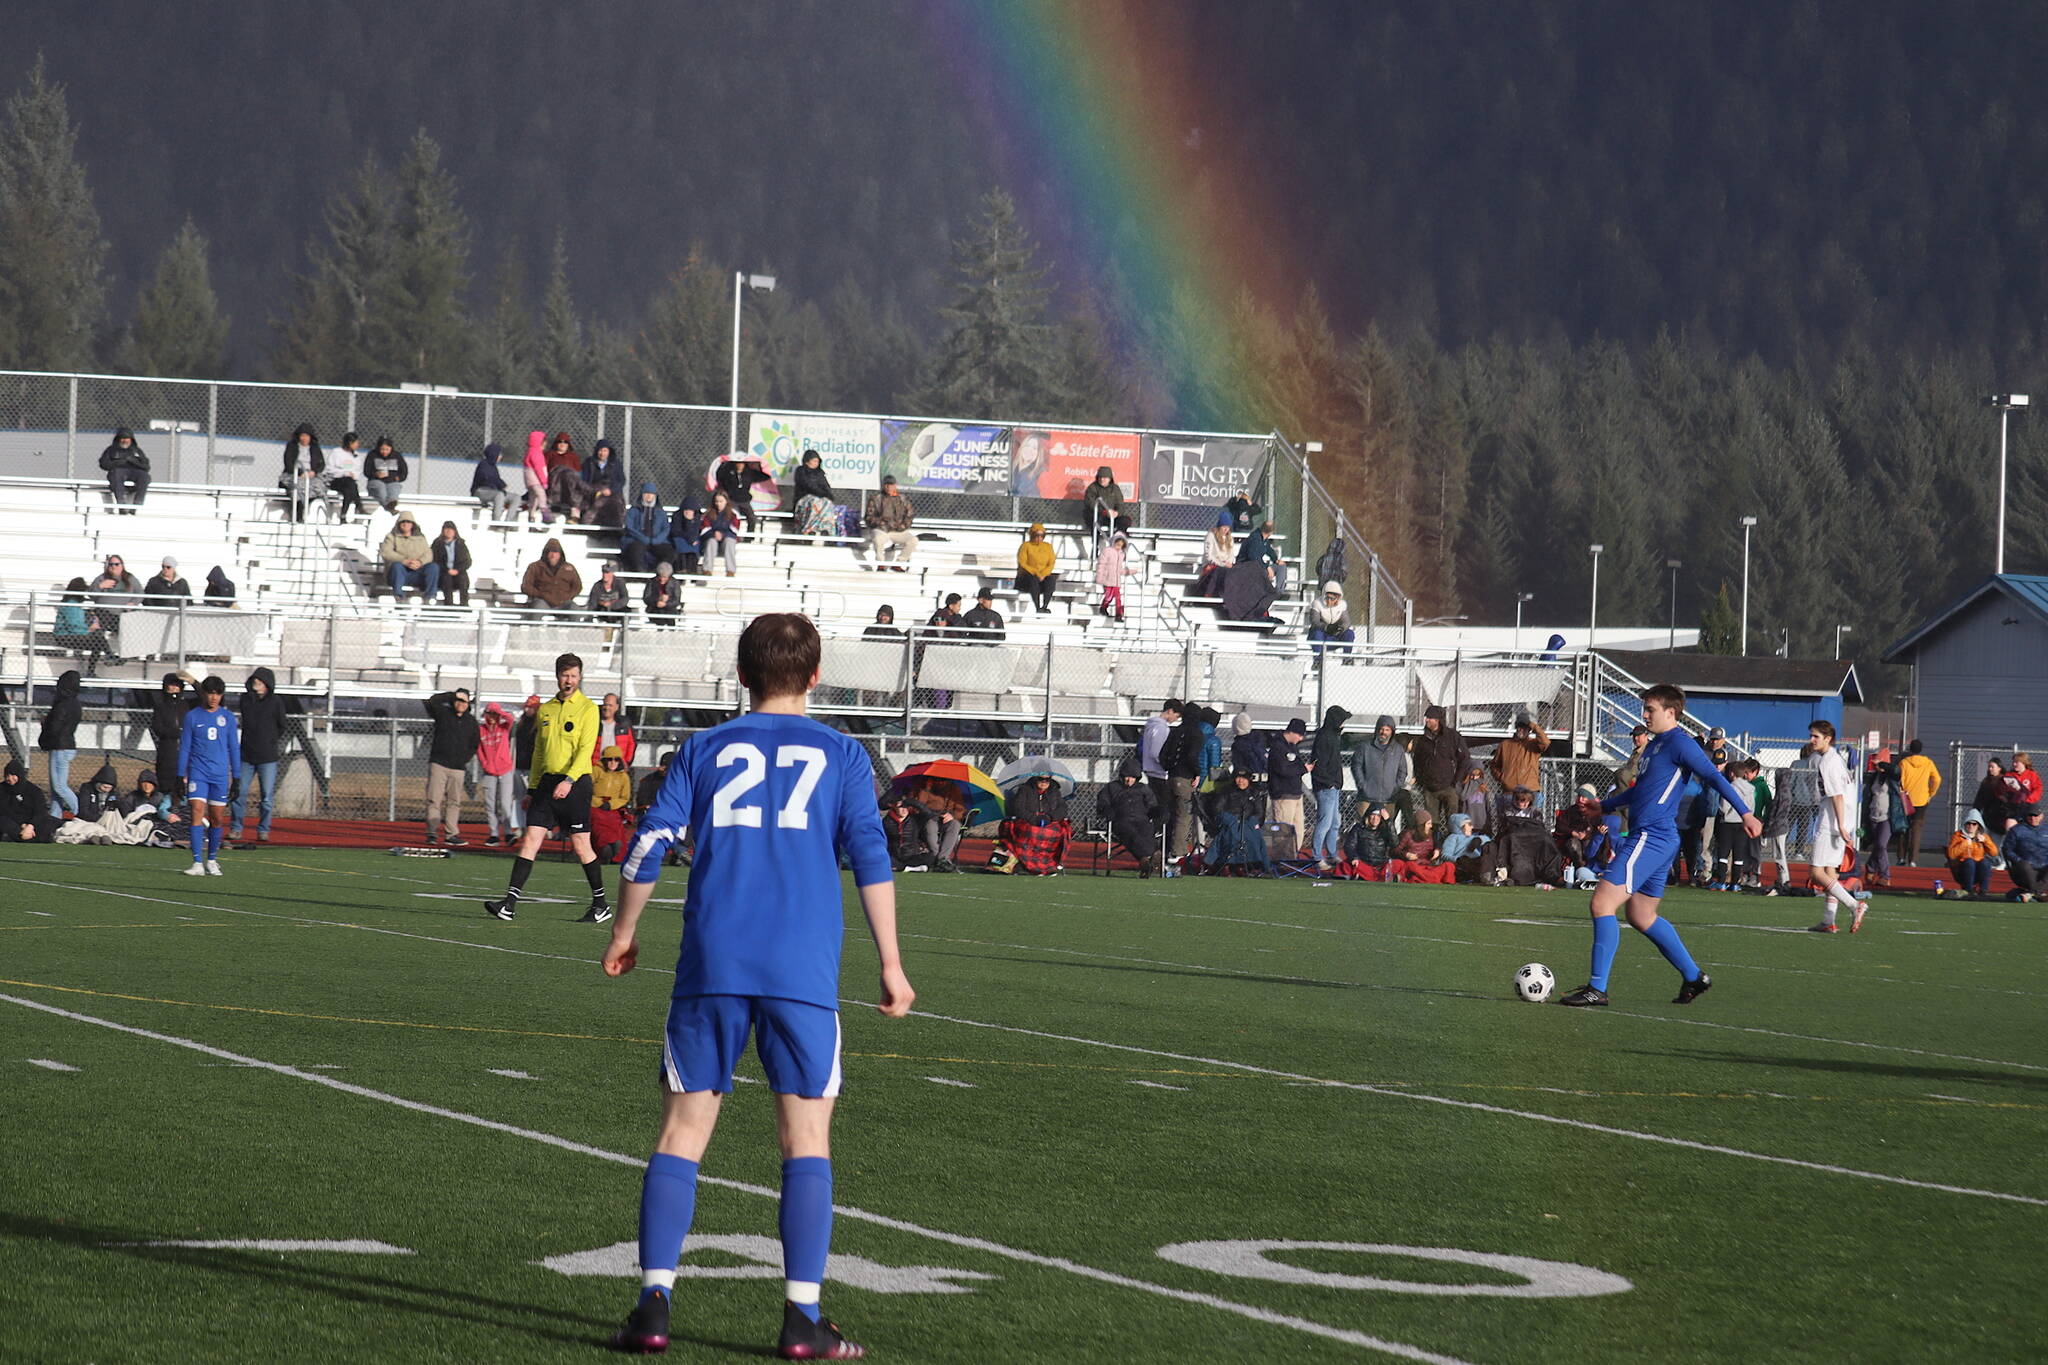 A rainbow connects with Kajson Cunningham (30) as he connects with the ball for Thunder Mountain High School during Tuesday’s game against Juneau-Douglas High School: Yadaa.at Kalé at JDHS, the opening match of the season for both teams. (Mark Sabbatini / Juneau Empire)